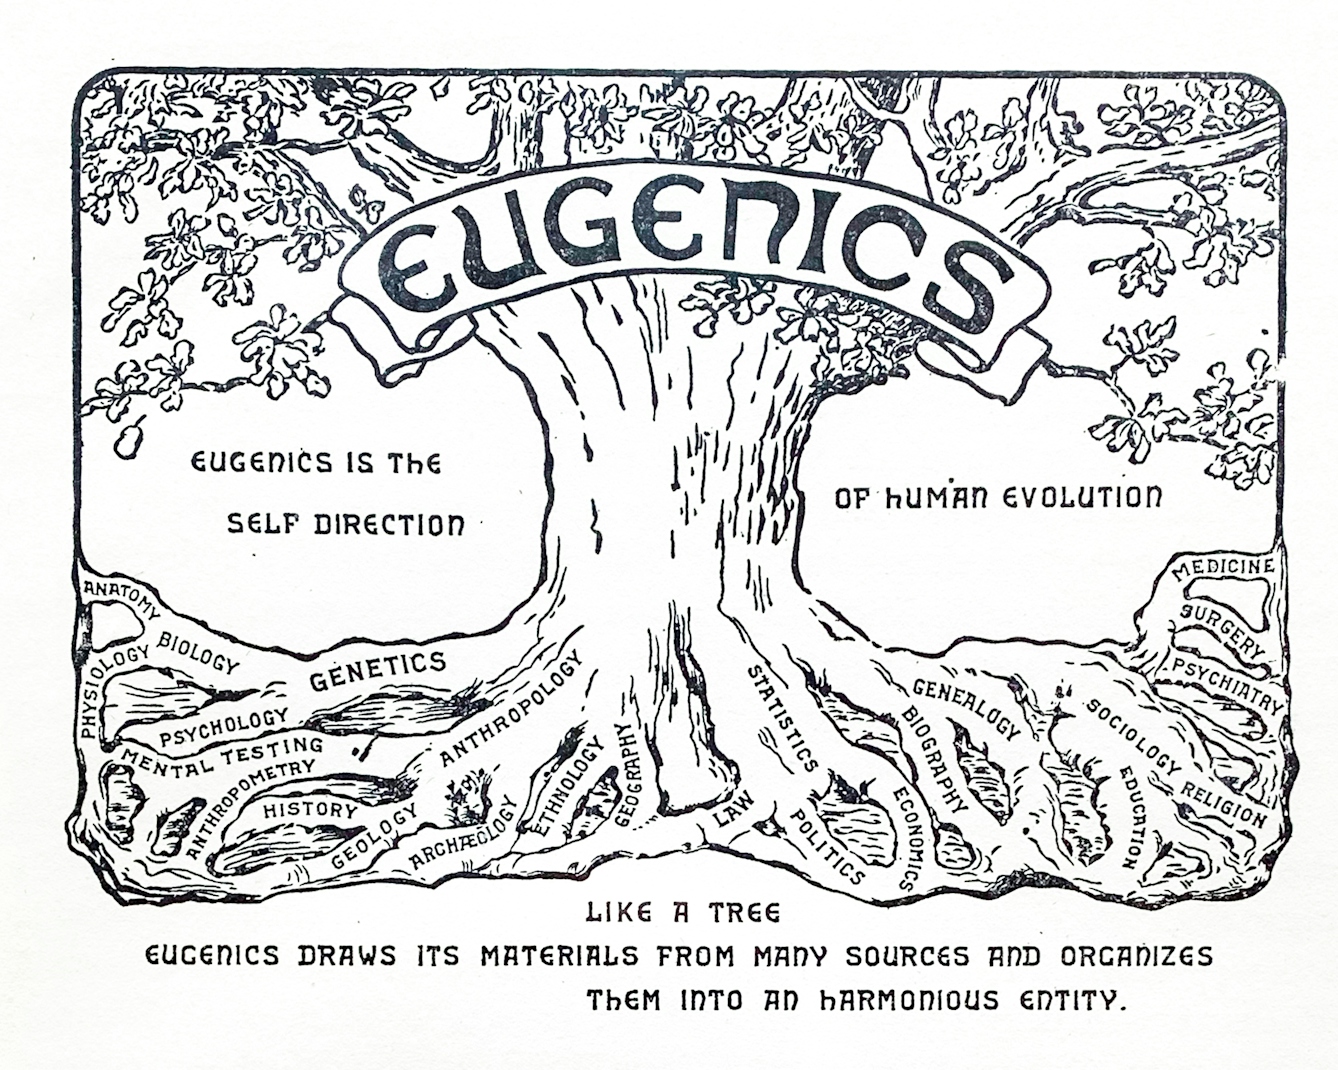 Black and white outline image of a tree labelled "Eugenics" which states that "eugenics is the self direction of human evolution" and has roots that are labelled with disciplines such as anthropology, genetics, statistics, genealogy, economics, and medicine. Below, a motto reads: “Like a tree eugenics draws its materials from many sources and organises them into an harmonious entity.”